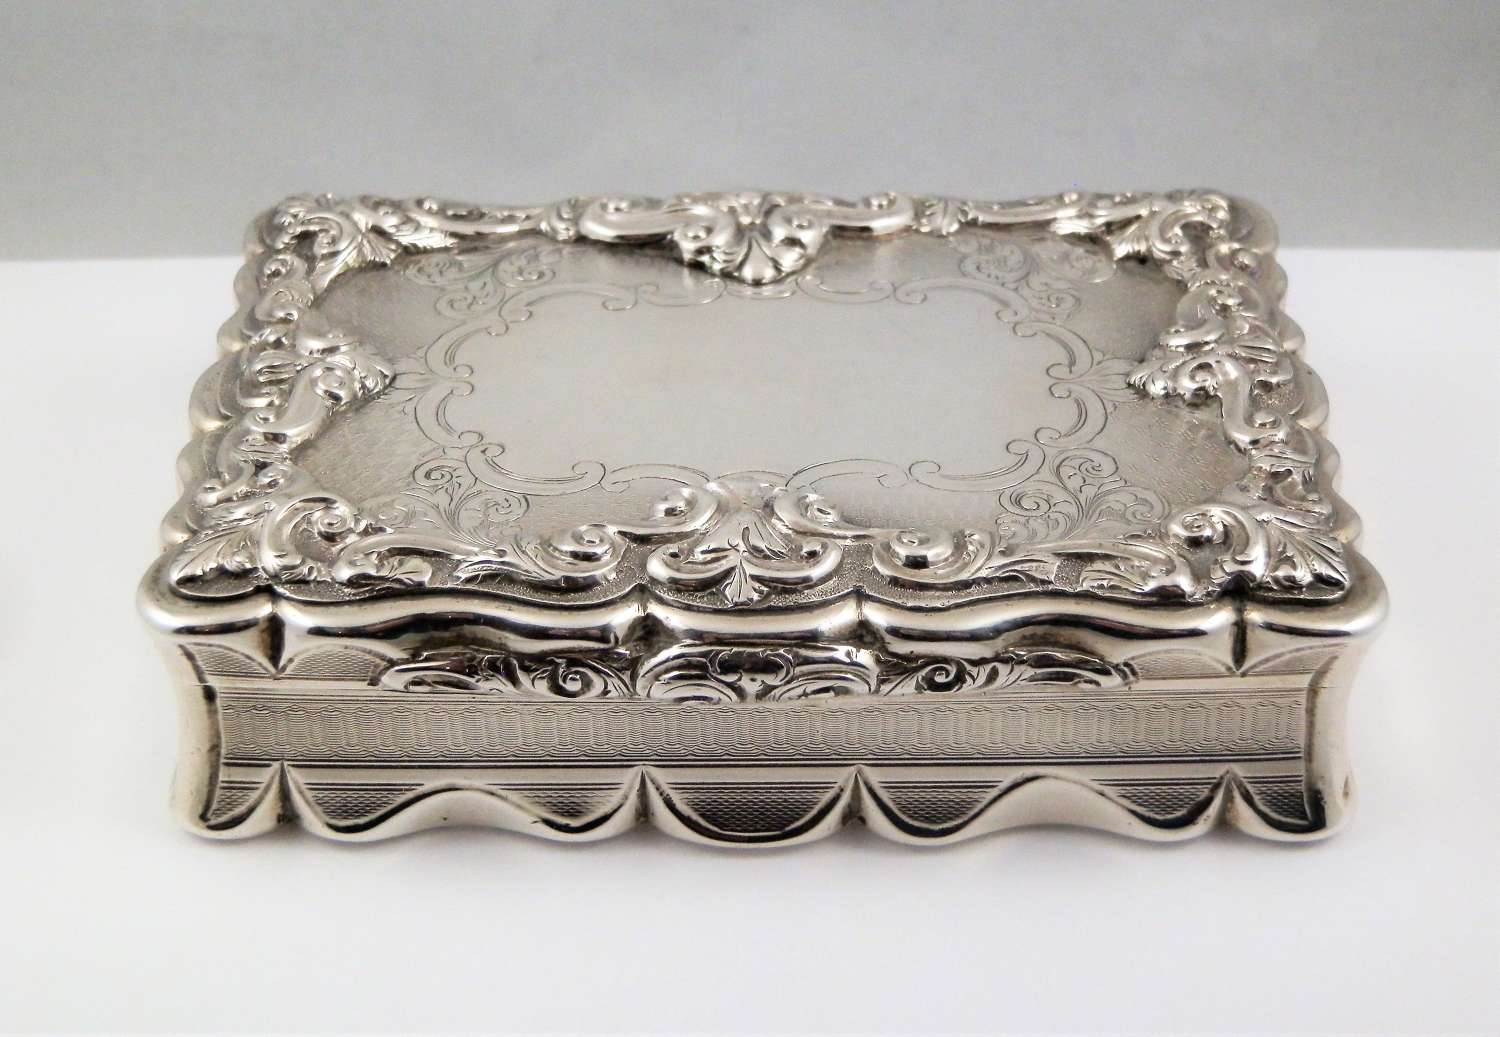 A large Victrorian silver table snuff box, Edward Smith 1852